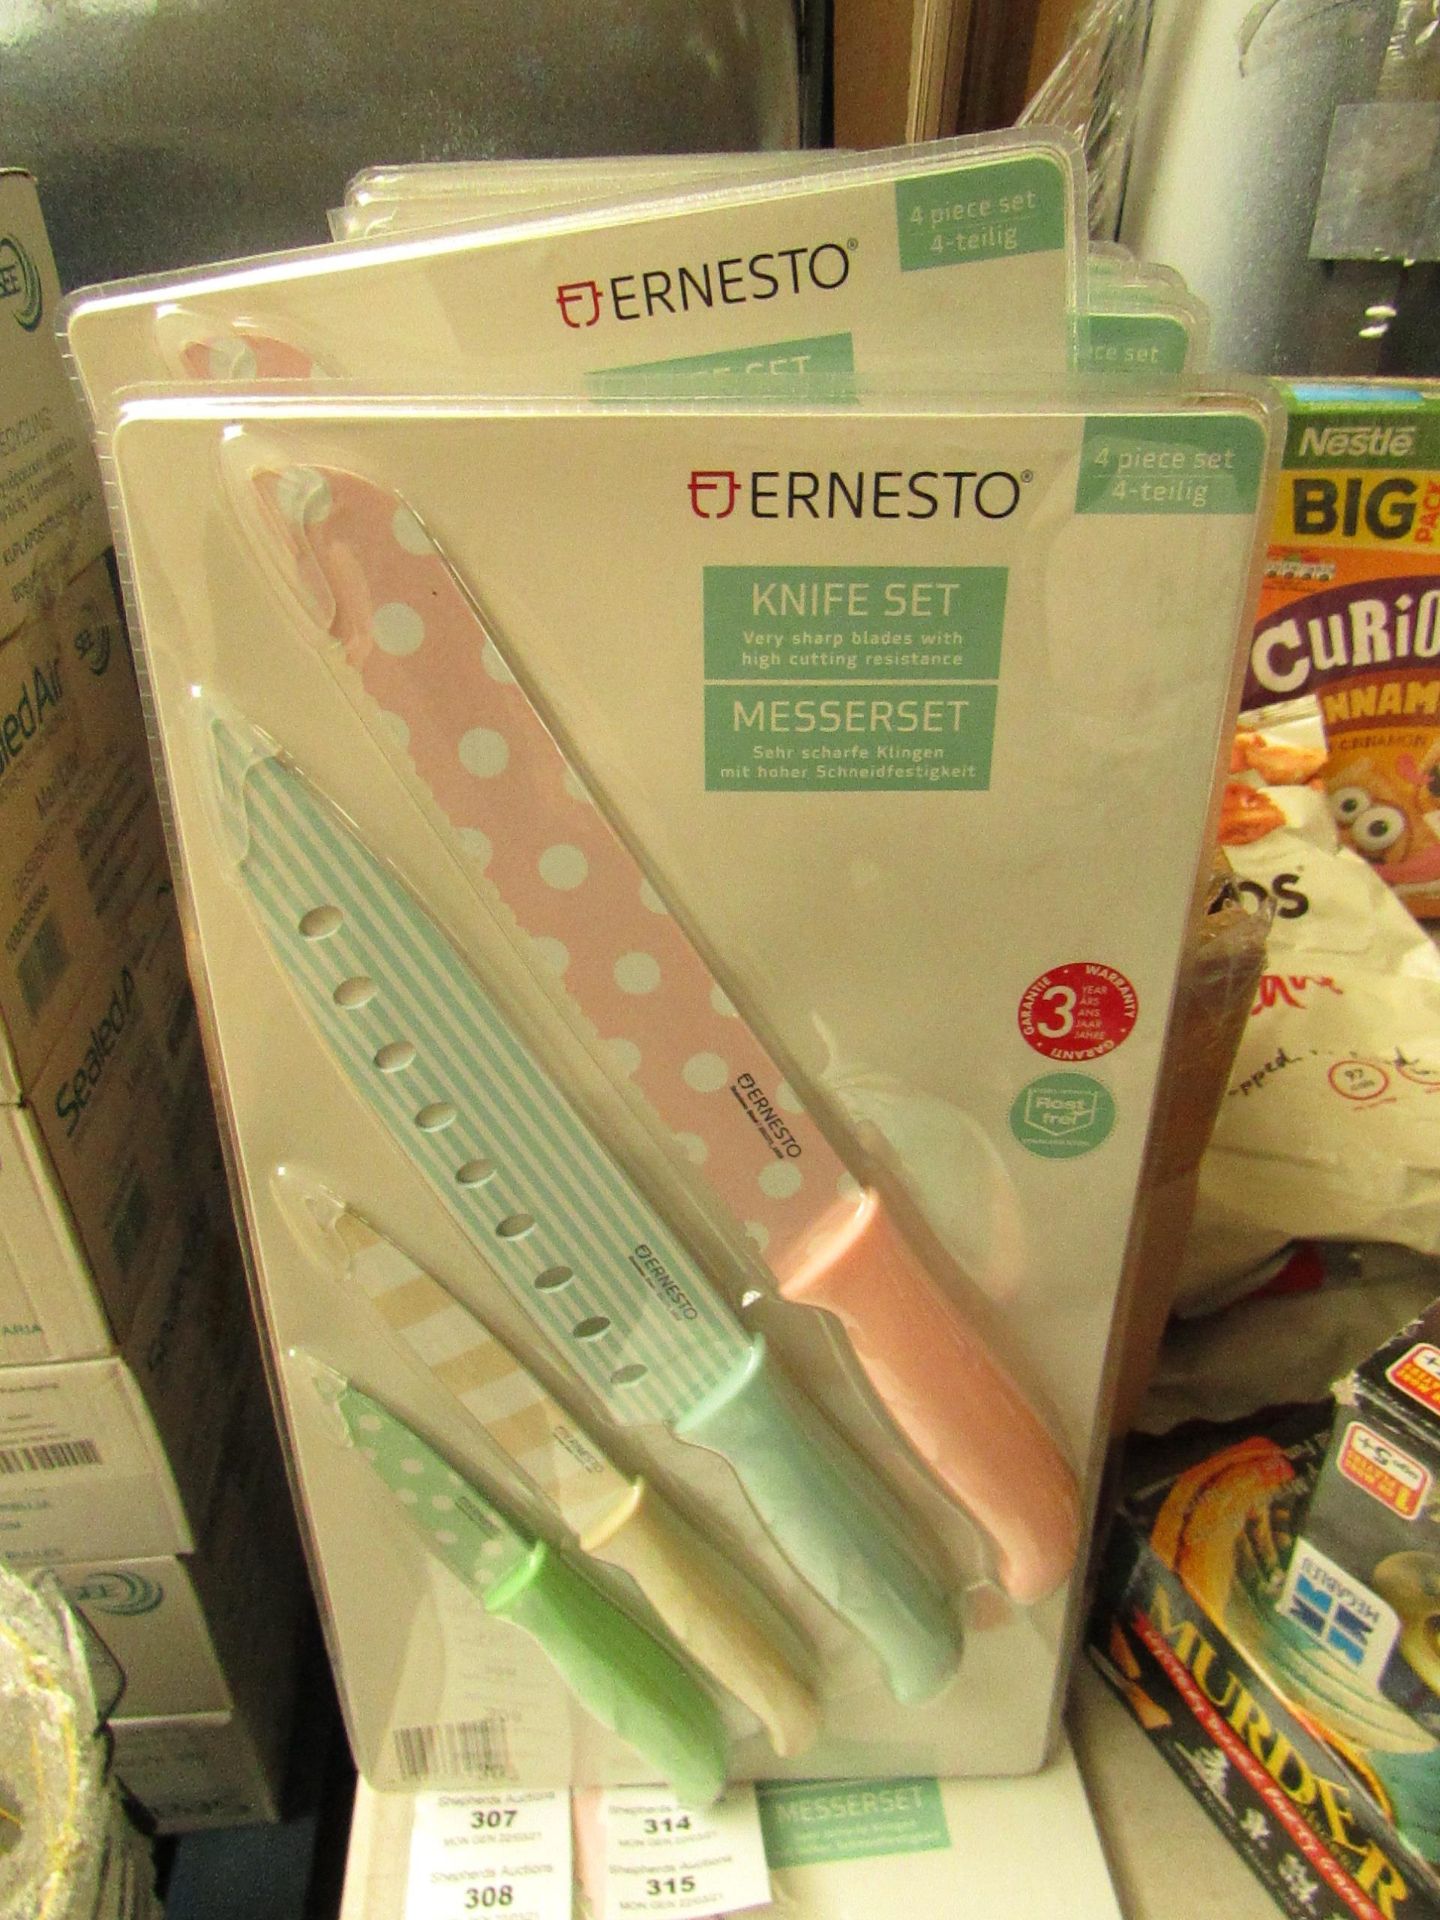 Ernesto - 4 Piece Knife Set (Multi-Colours & Pattern/Designs) - New & Packaged.